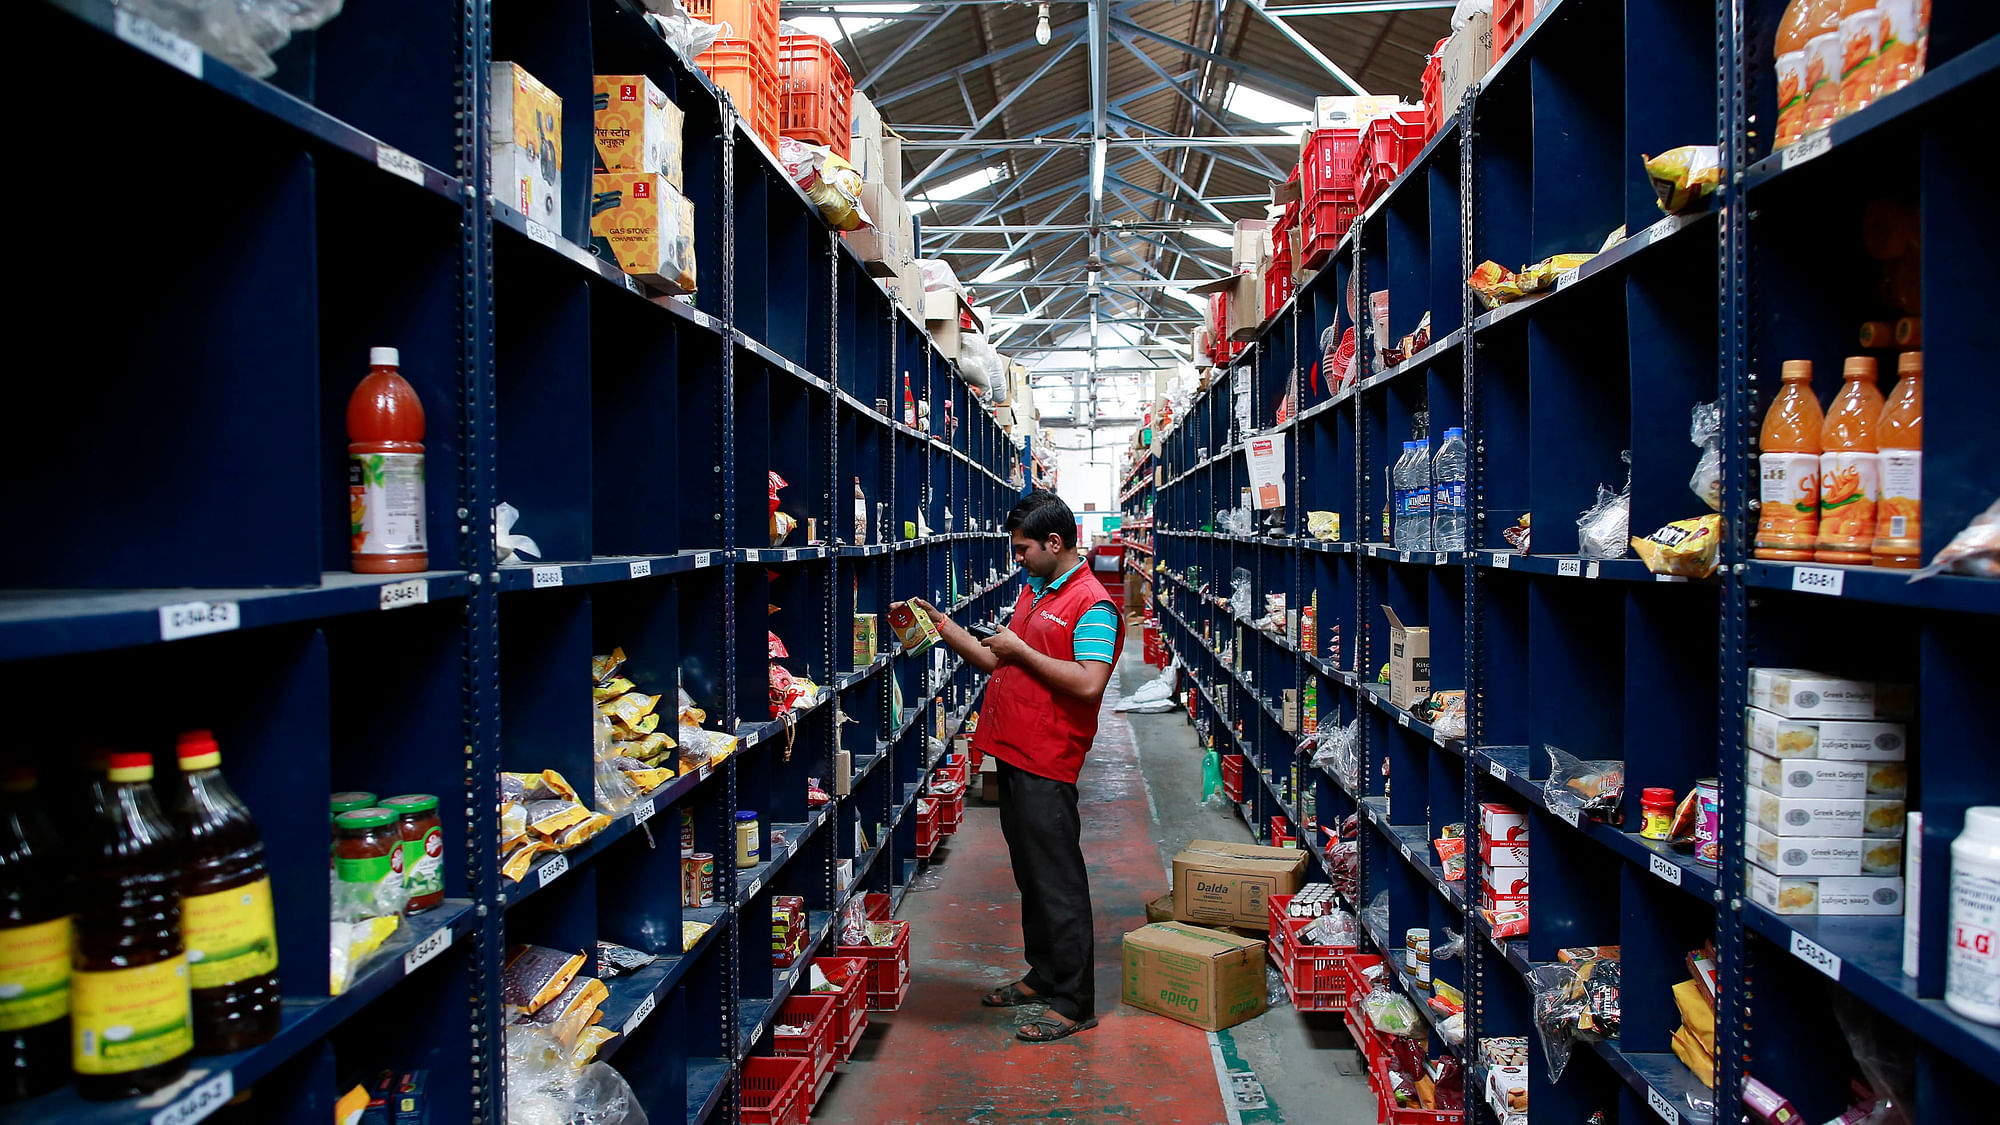 An employee scans a package for an order at a warehouse on the outskirts of Mumbai. (Photo: Reuters)